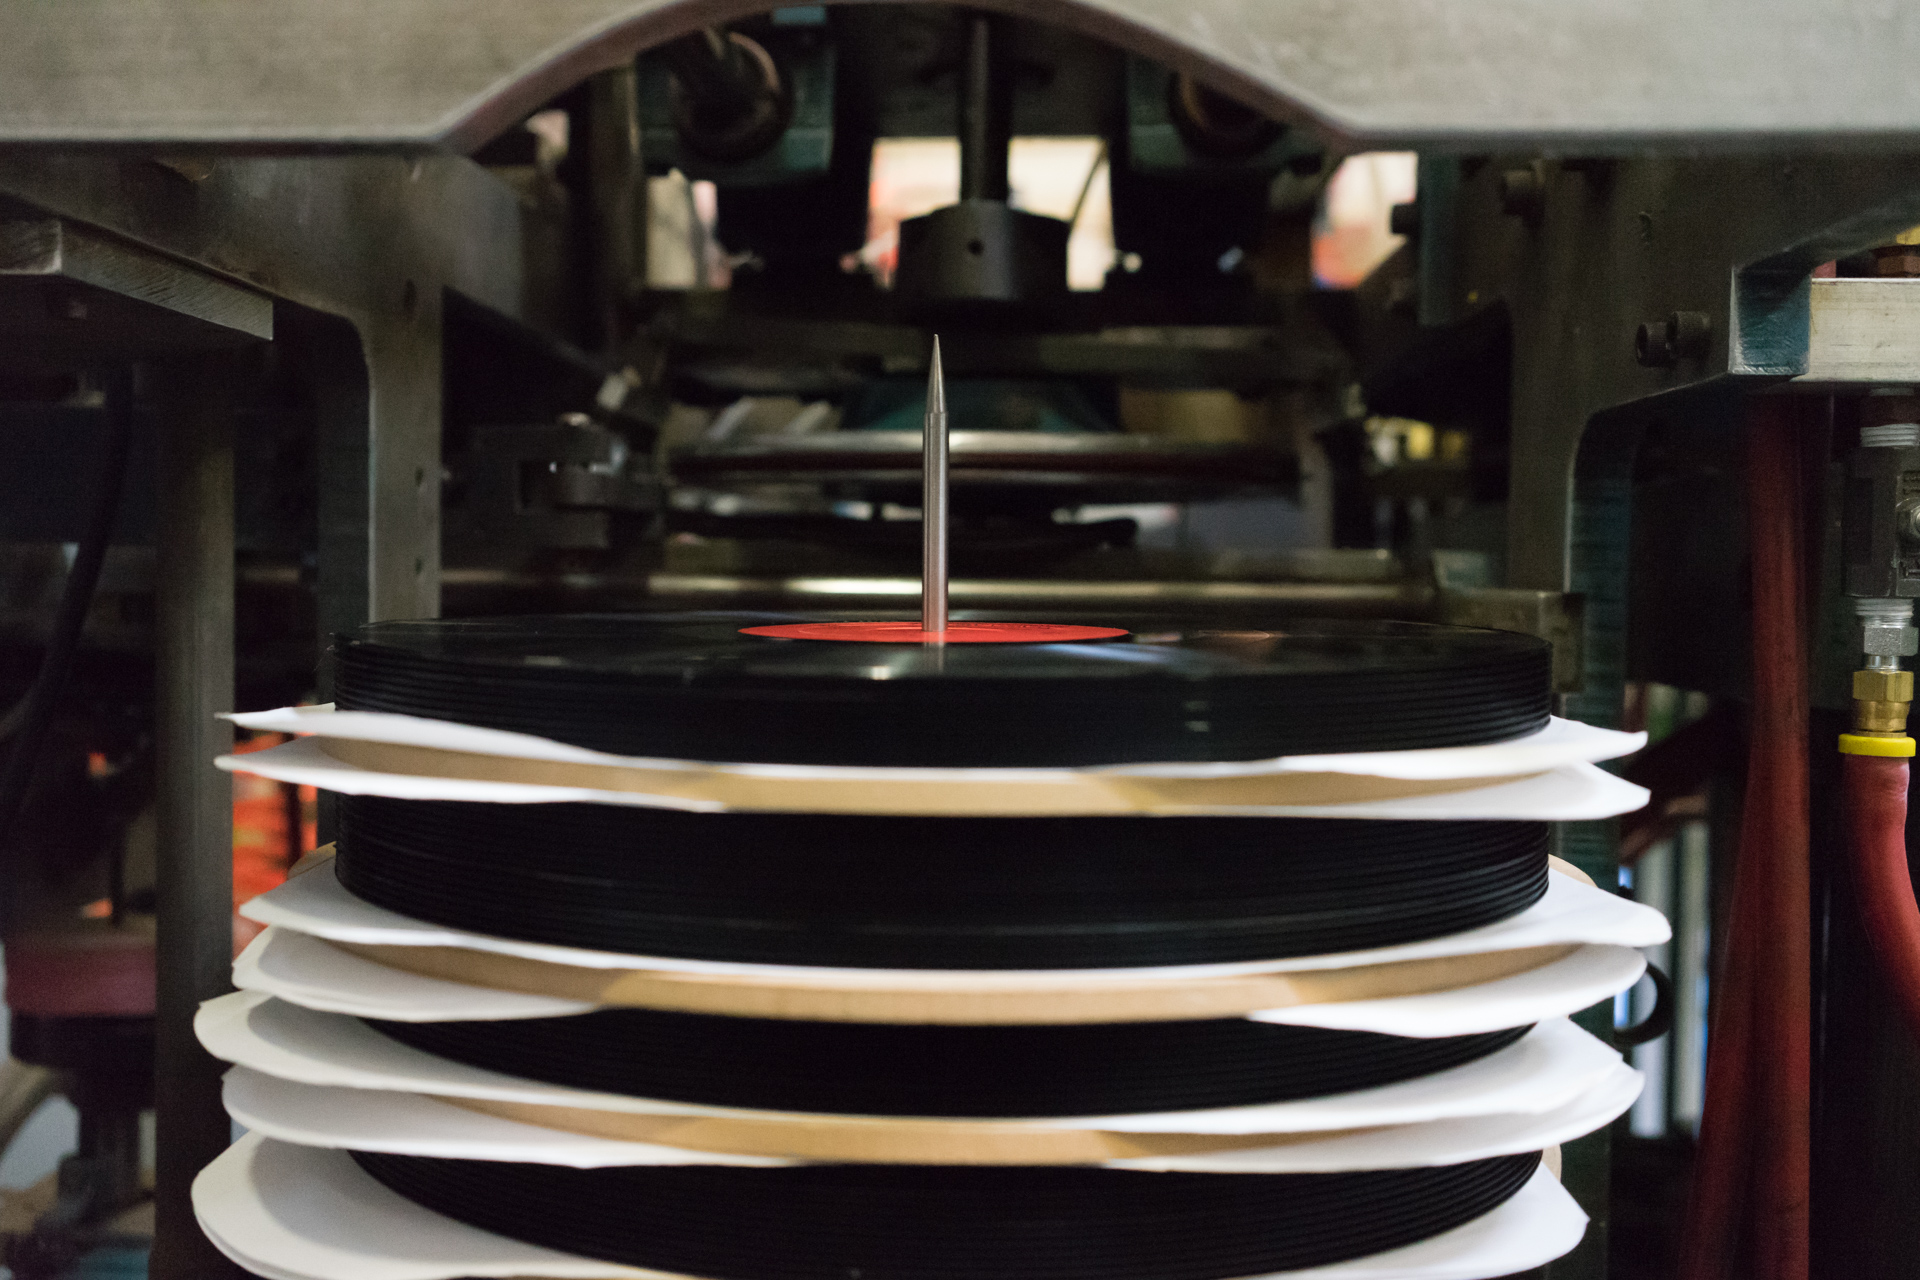  Pressed vinyl records are stacked to cool 